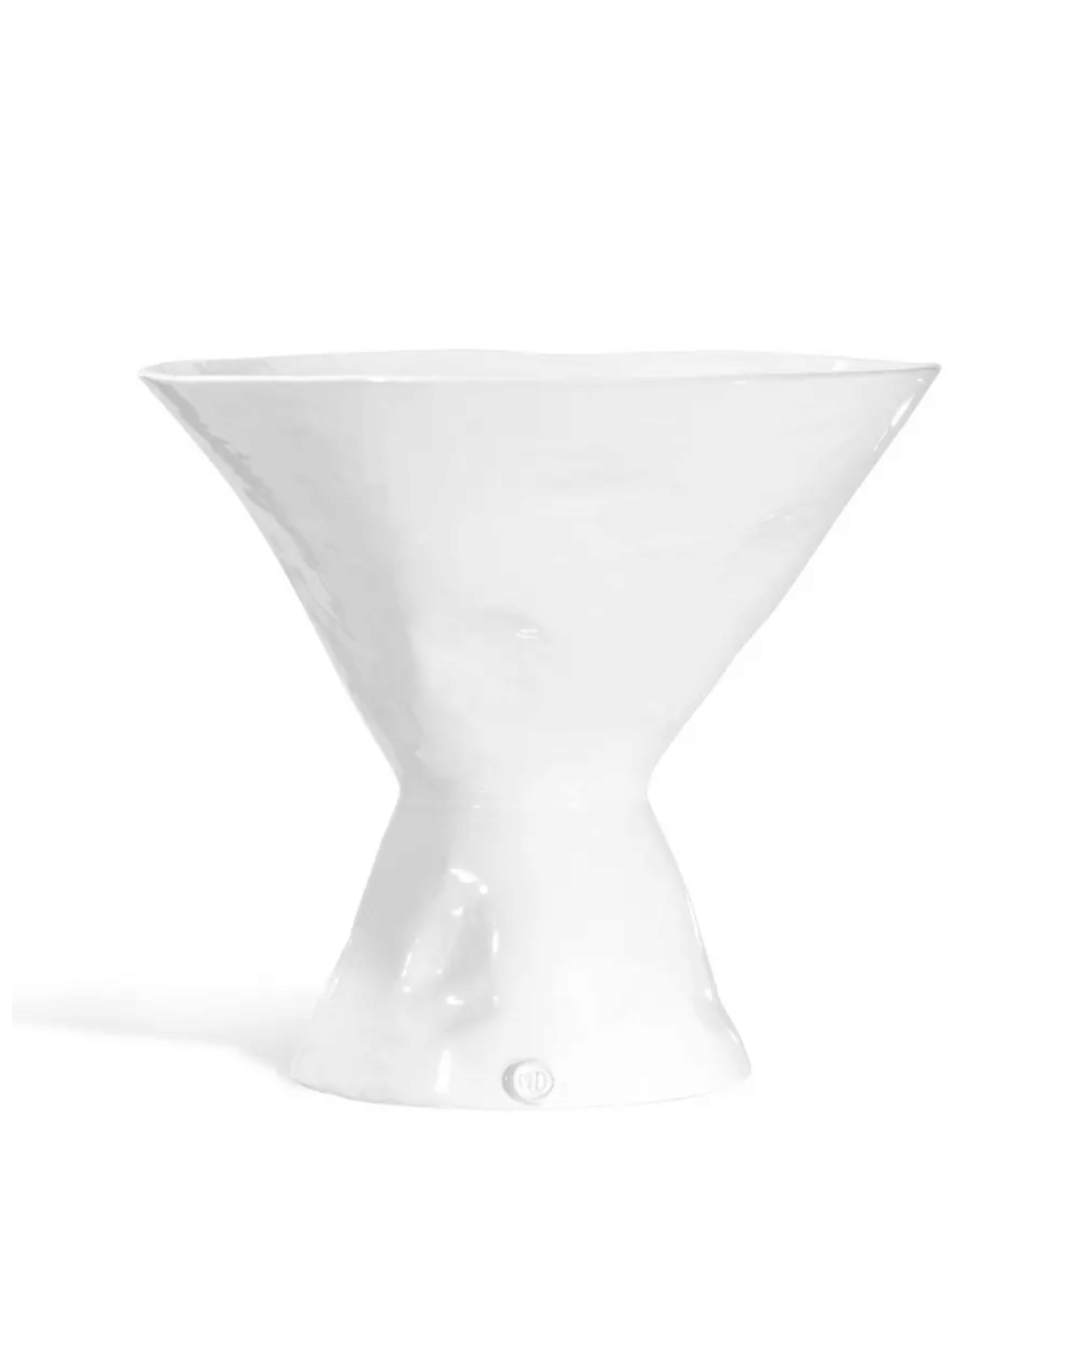 A sleek, white hourglass-shaped Catchall Bowl No. 979 with a reflective surface on a plain white background, embodying the minimalist aesthetic of a Scottsdale Arizona bungalow. The vase narrows in the middle and flares out at the top and bottom.